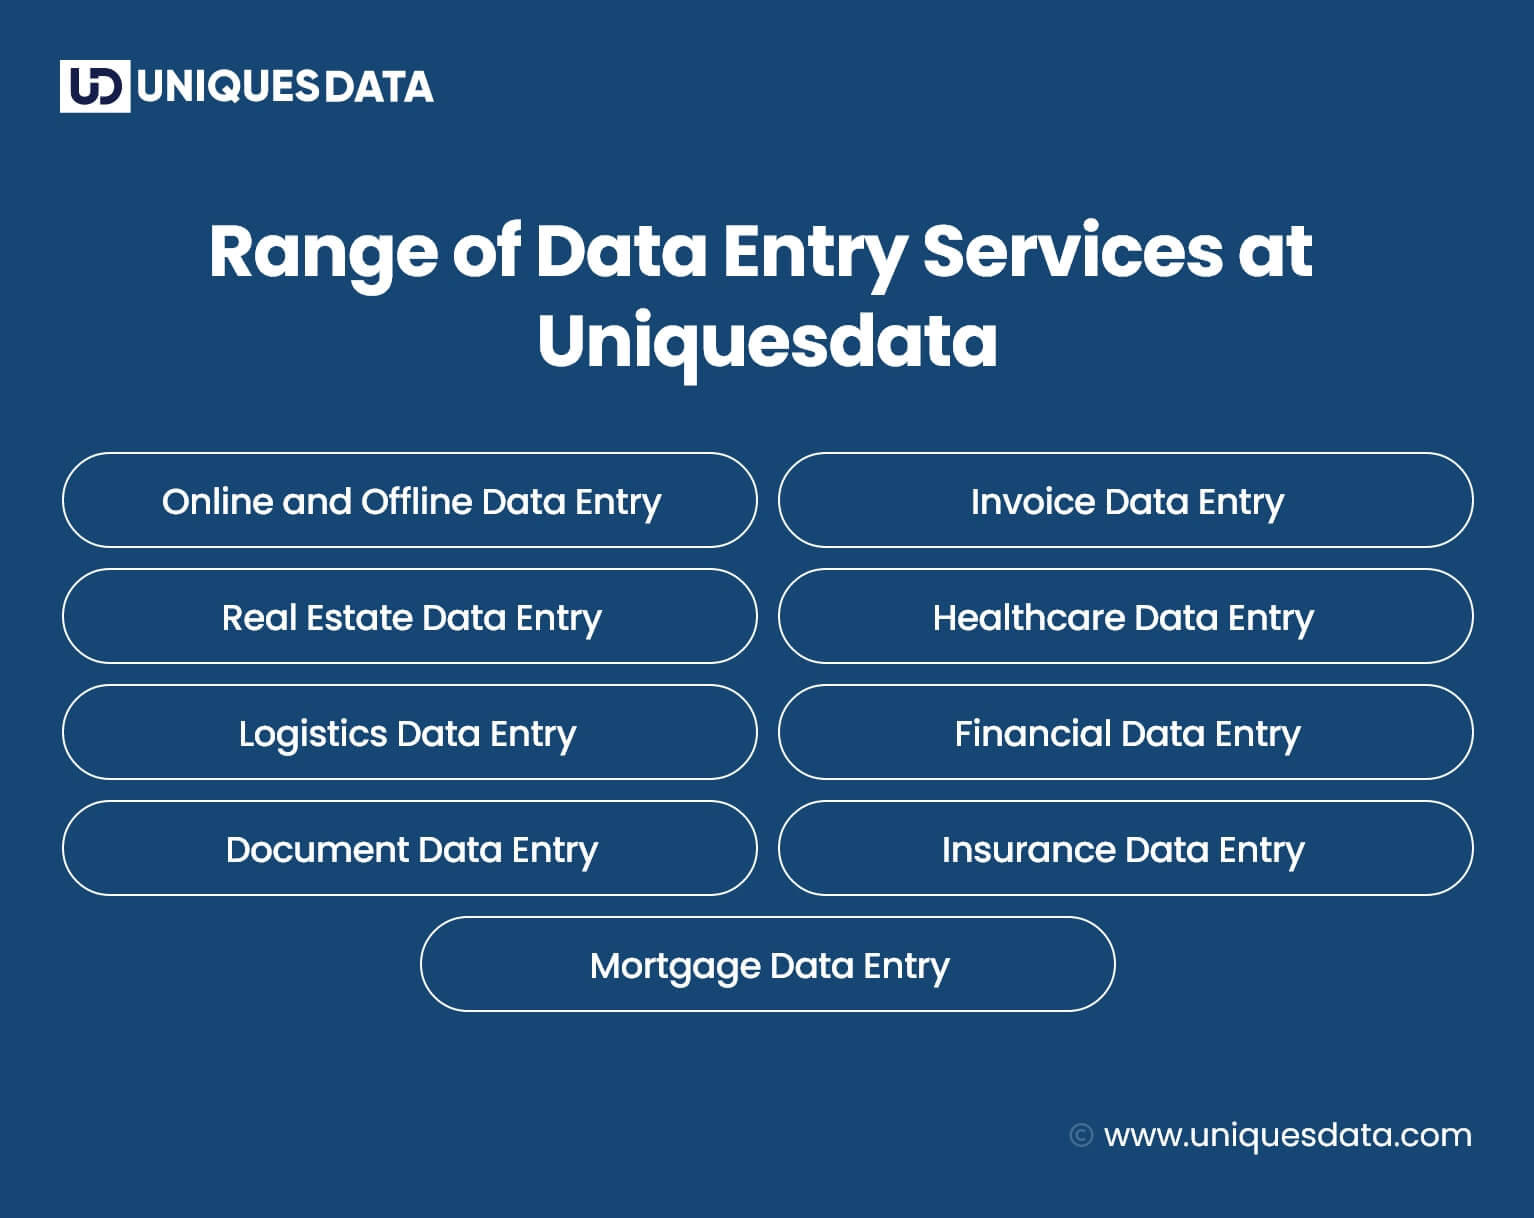 Range of Data Entry Services at Uniquesdata